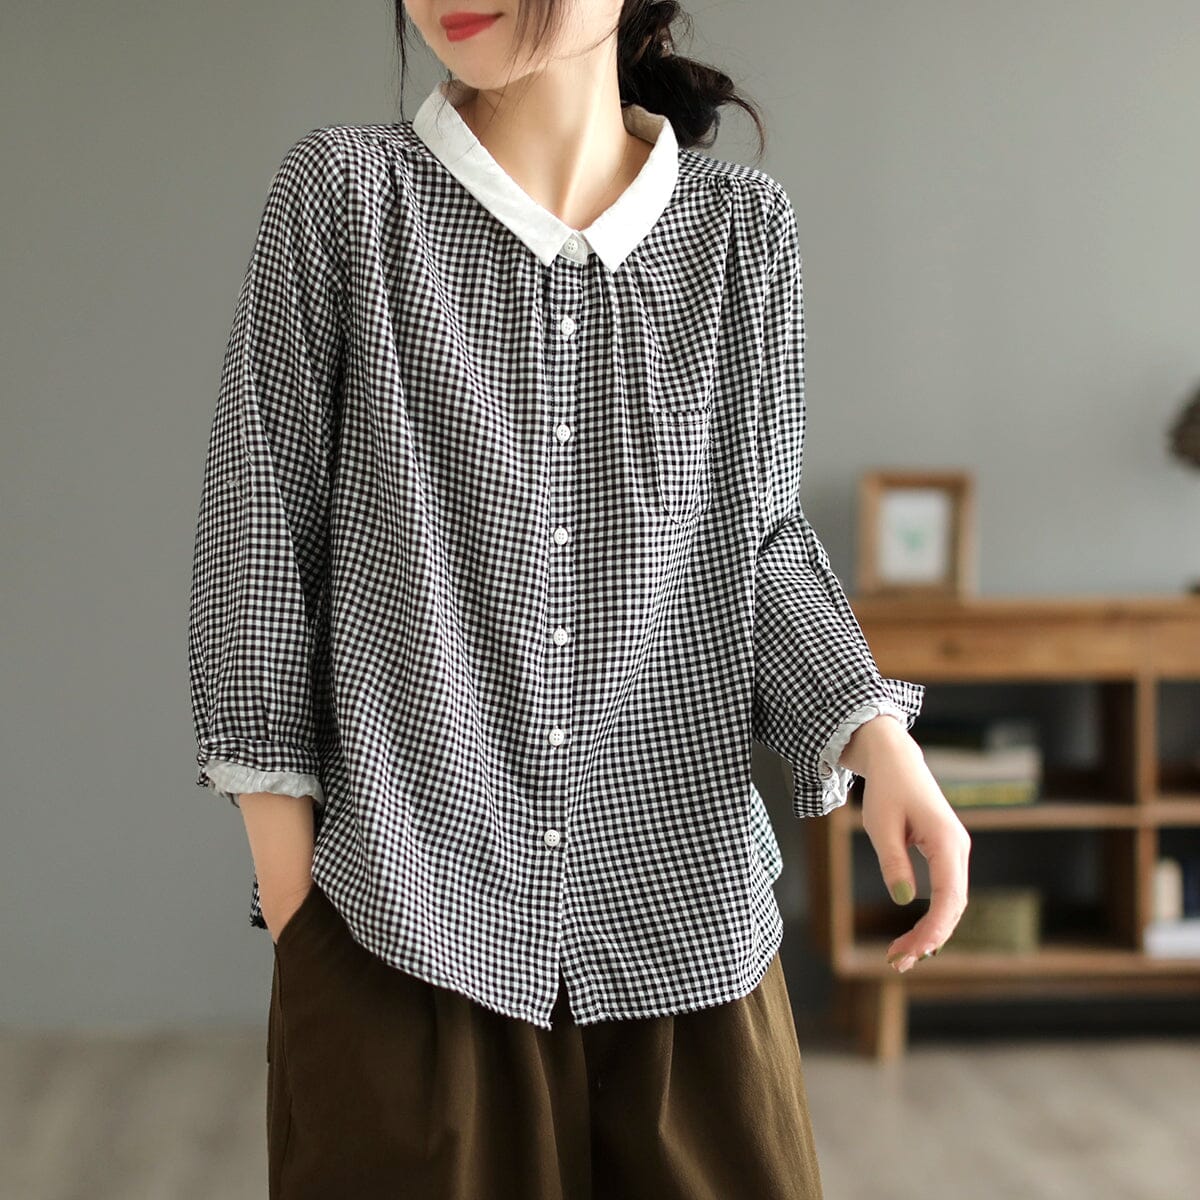 Spring Casual Plaid Double-Layer Cotton Blouse